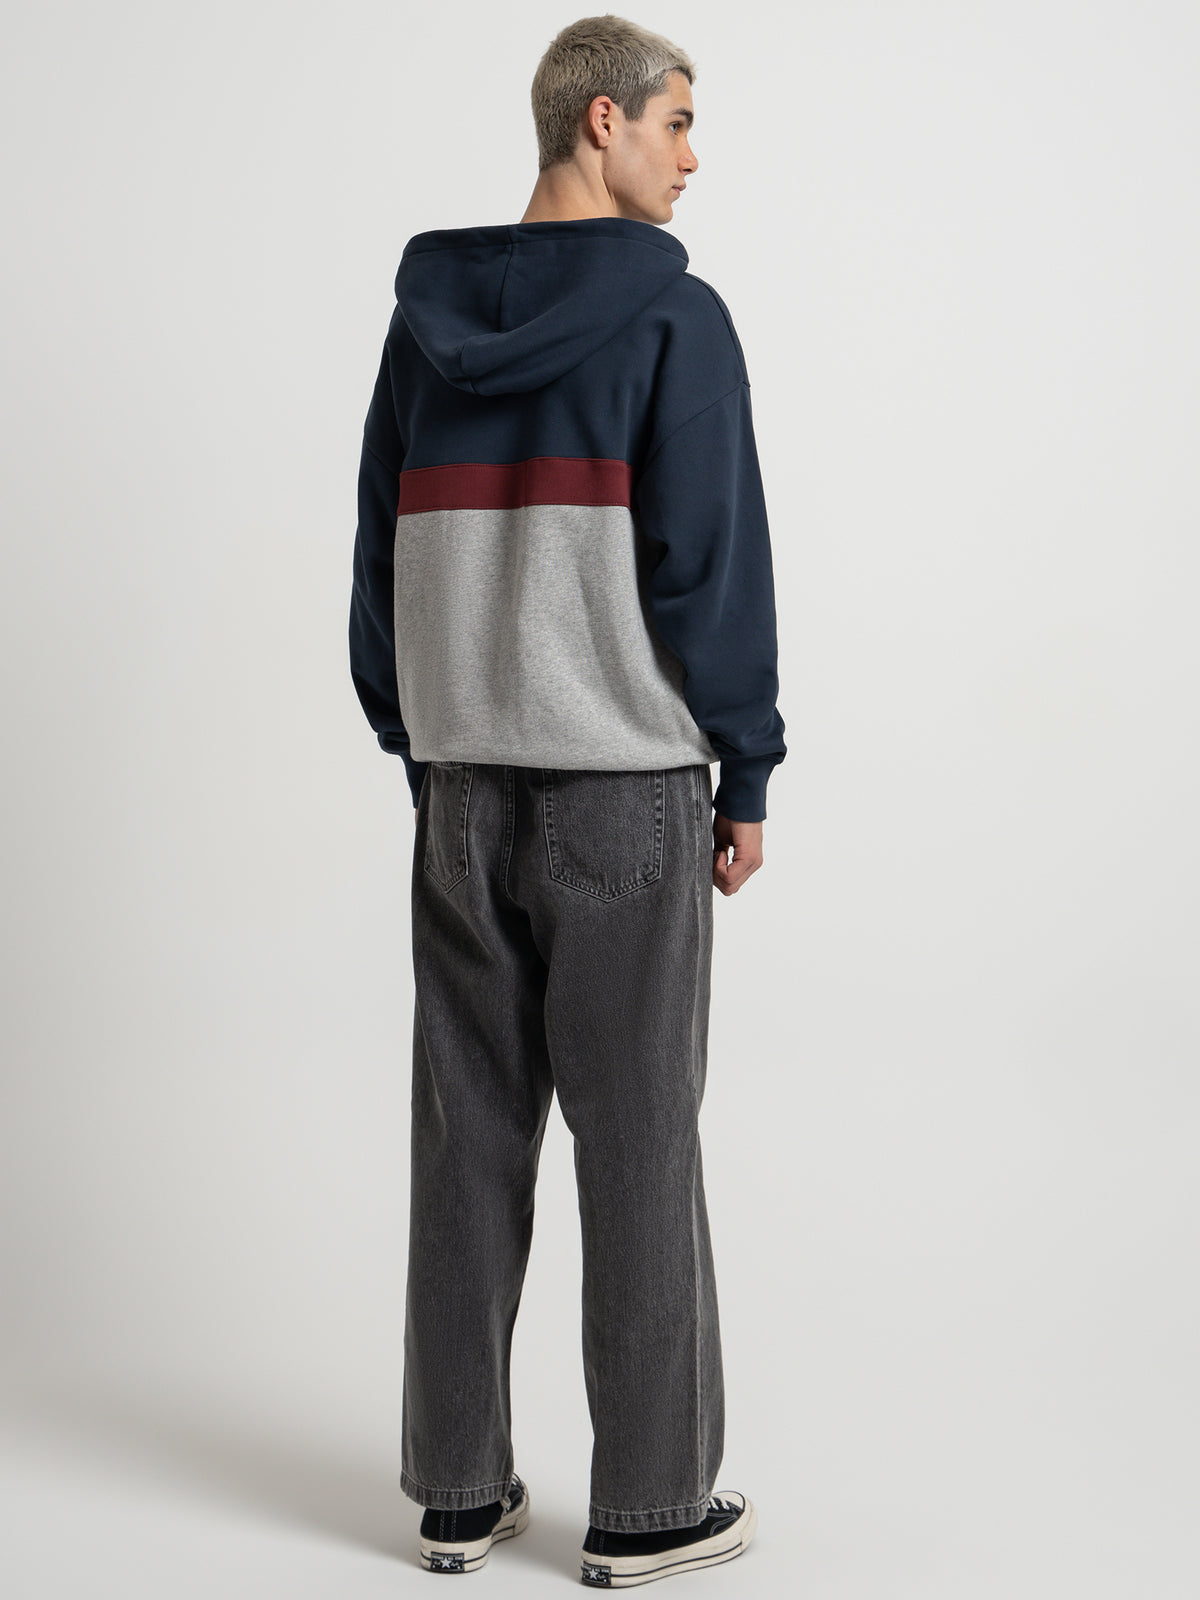 Chariot Pull On Slouch Hoodie in Blue, Maroon &amp; Grey